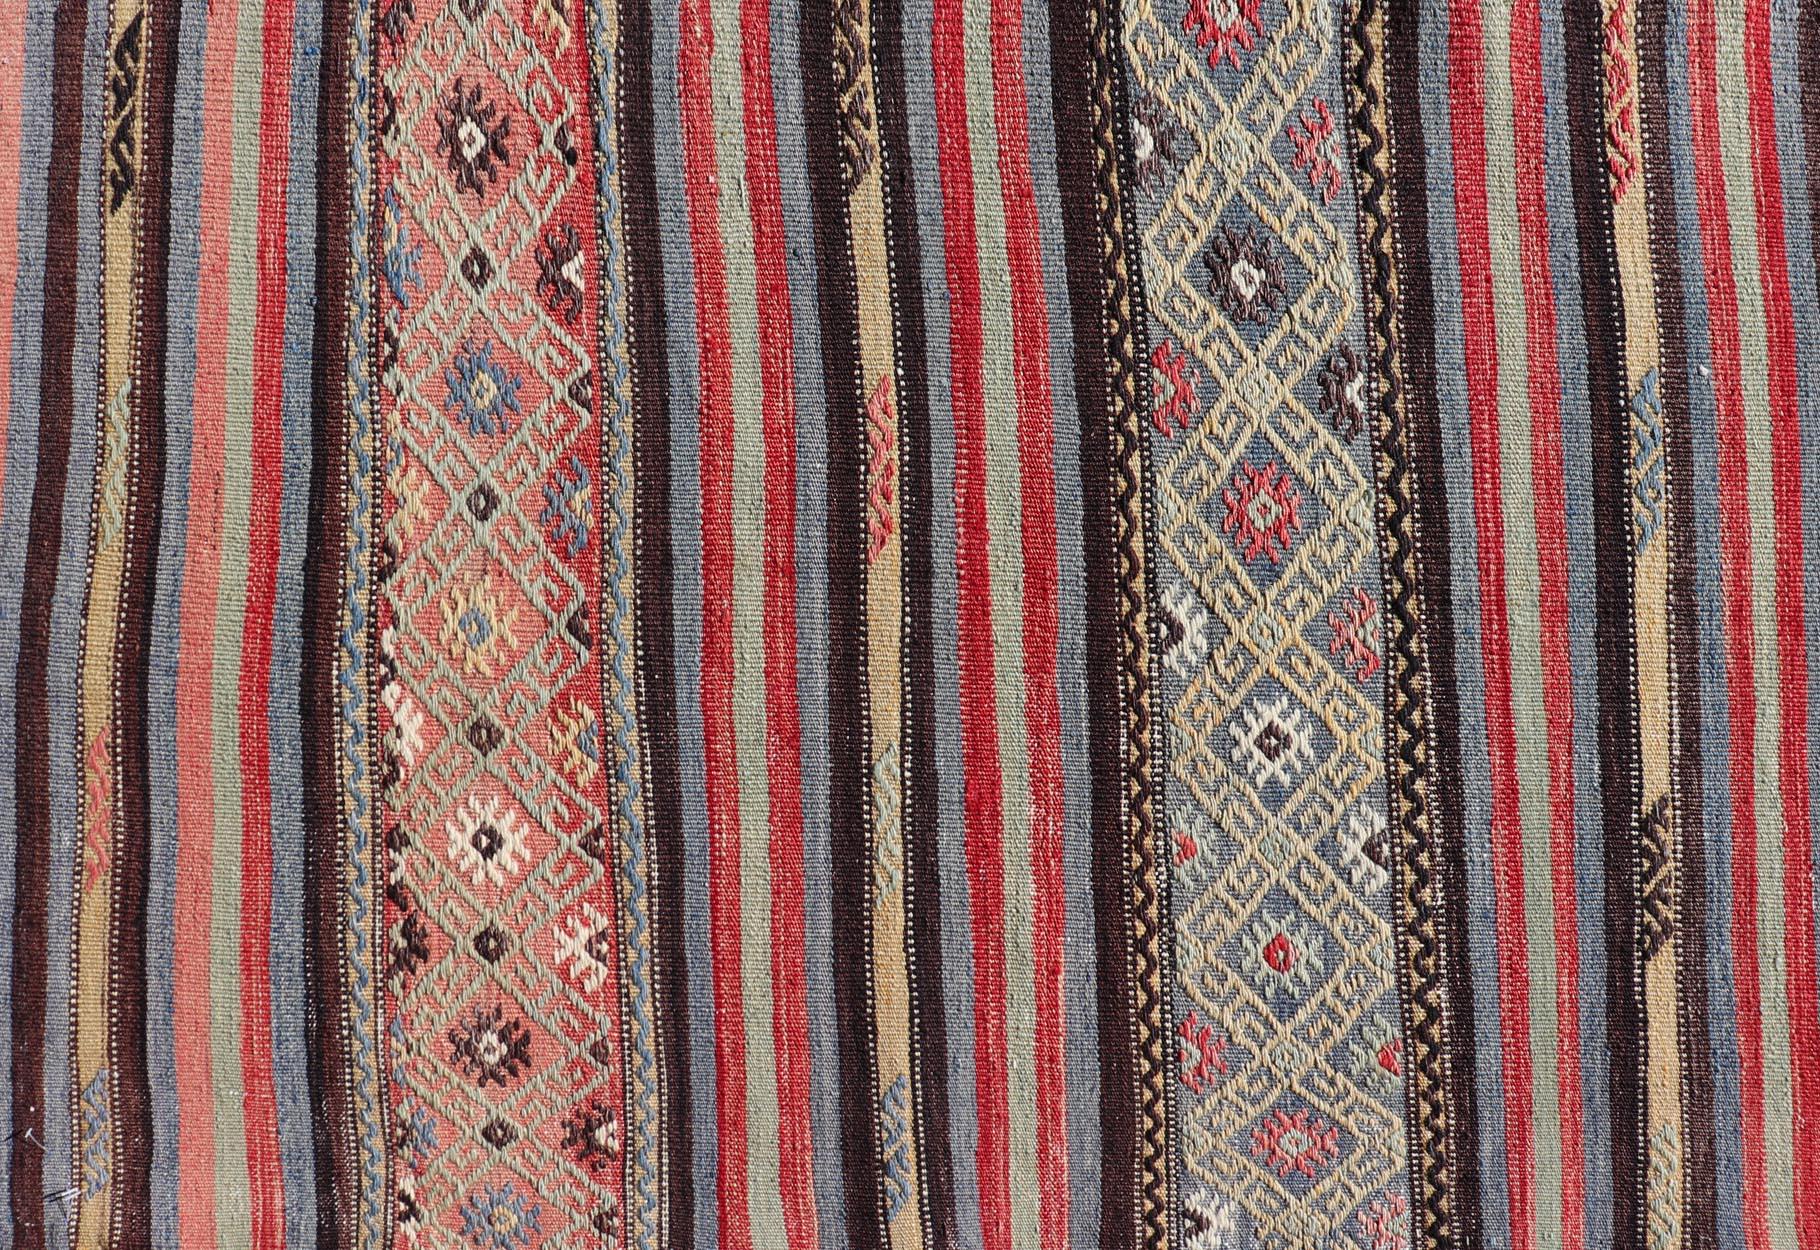 Hand woven vintage Turkish Kilim in colors with hand woven motifs with stripes in various tones. Rug TU-NED-5047, country of origin / type: Turkey / Kilim, circa Mid-20th Century.

Measures: 2'5 x 9'5